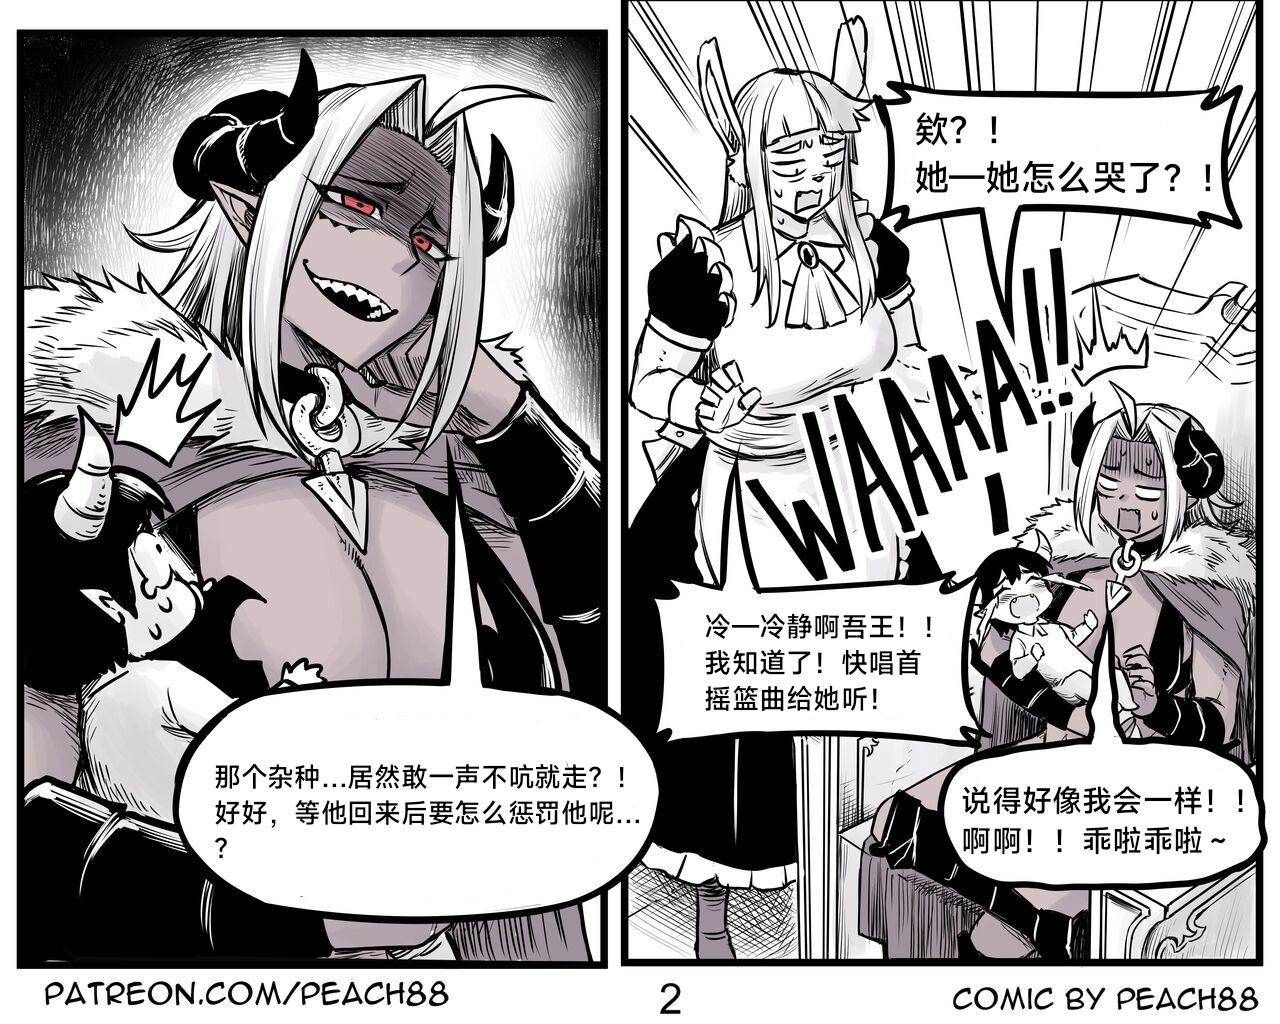 [PeaCh88] 魔王女朋友 Demon King GF ch1-8 (+Patreon extra) ［无机咖啡酸个人汉化］[Chinese][ongoing] - Page 21